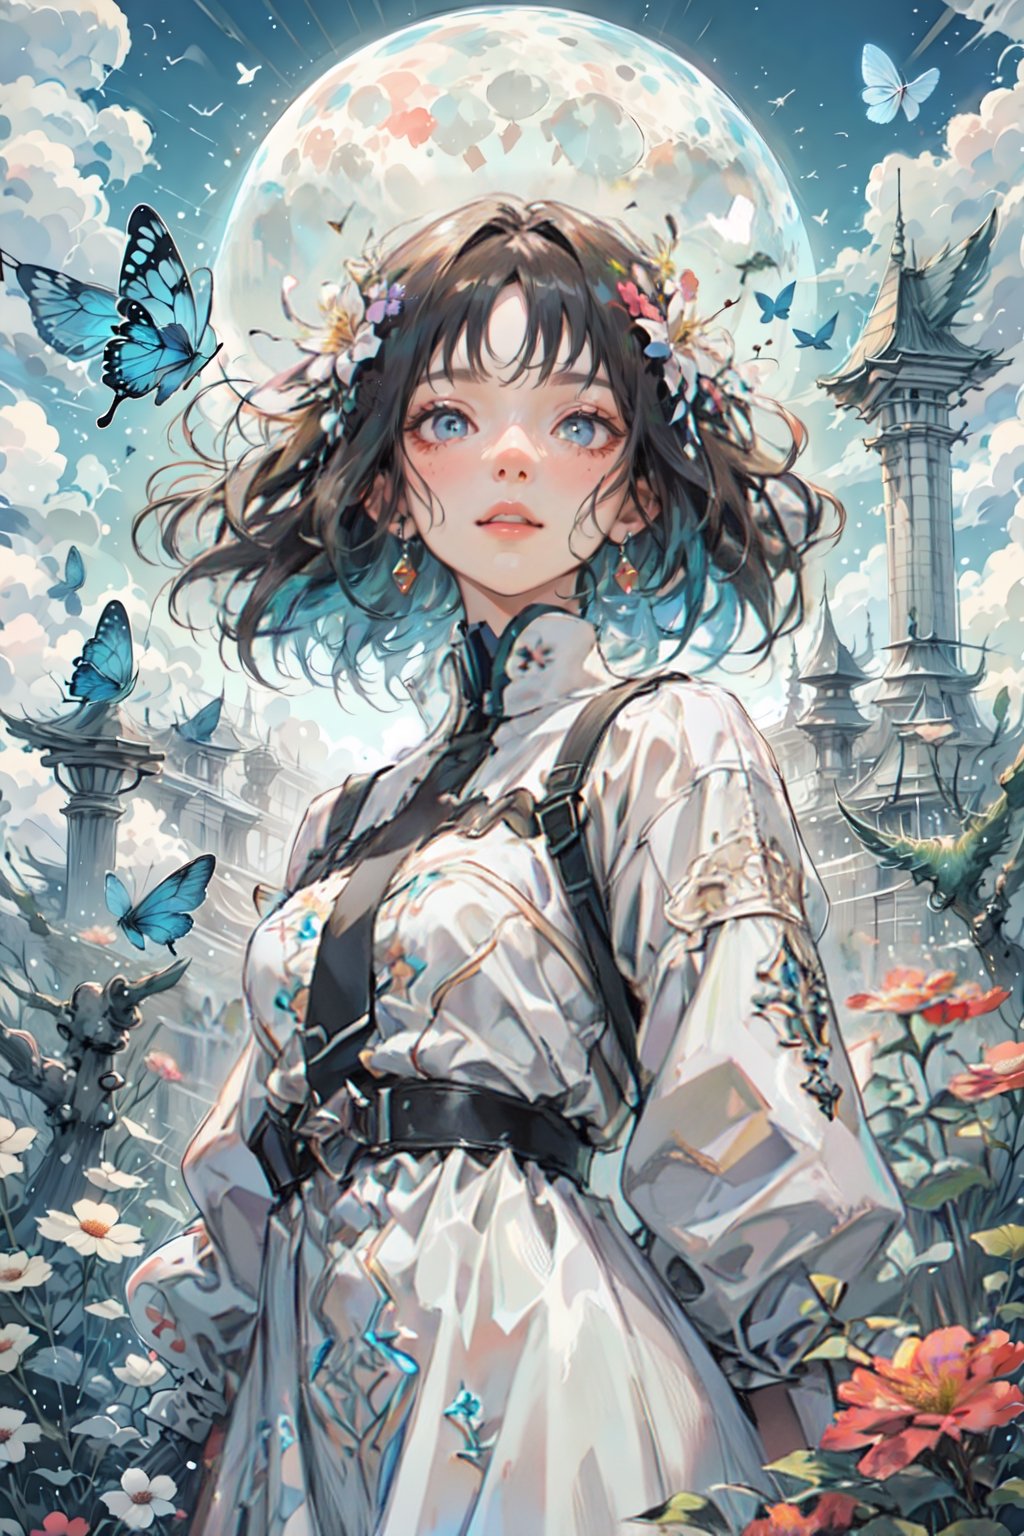 Maximalism, masterpiece, top quality, 8k, high resolution, super detailed, absurd, vivid contrast, insanely detailed,
BREAK
1girl, (Beautiful face, brightly colored shining eyes, clear skin, shiny hair: 1.2),
BREAK
(Flowers, butterflies, wind, moon:1.3)
BREAK
(Full-length composition:1.4),girl, CrclWc,dragonbaby